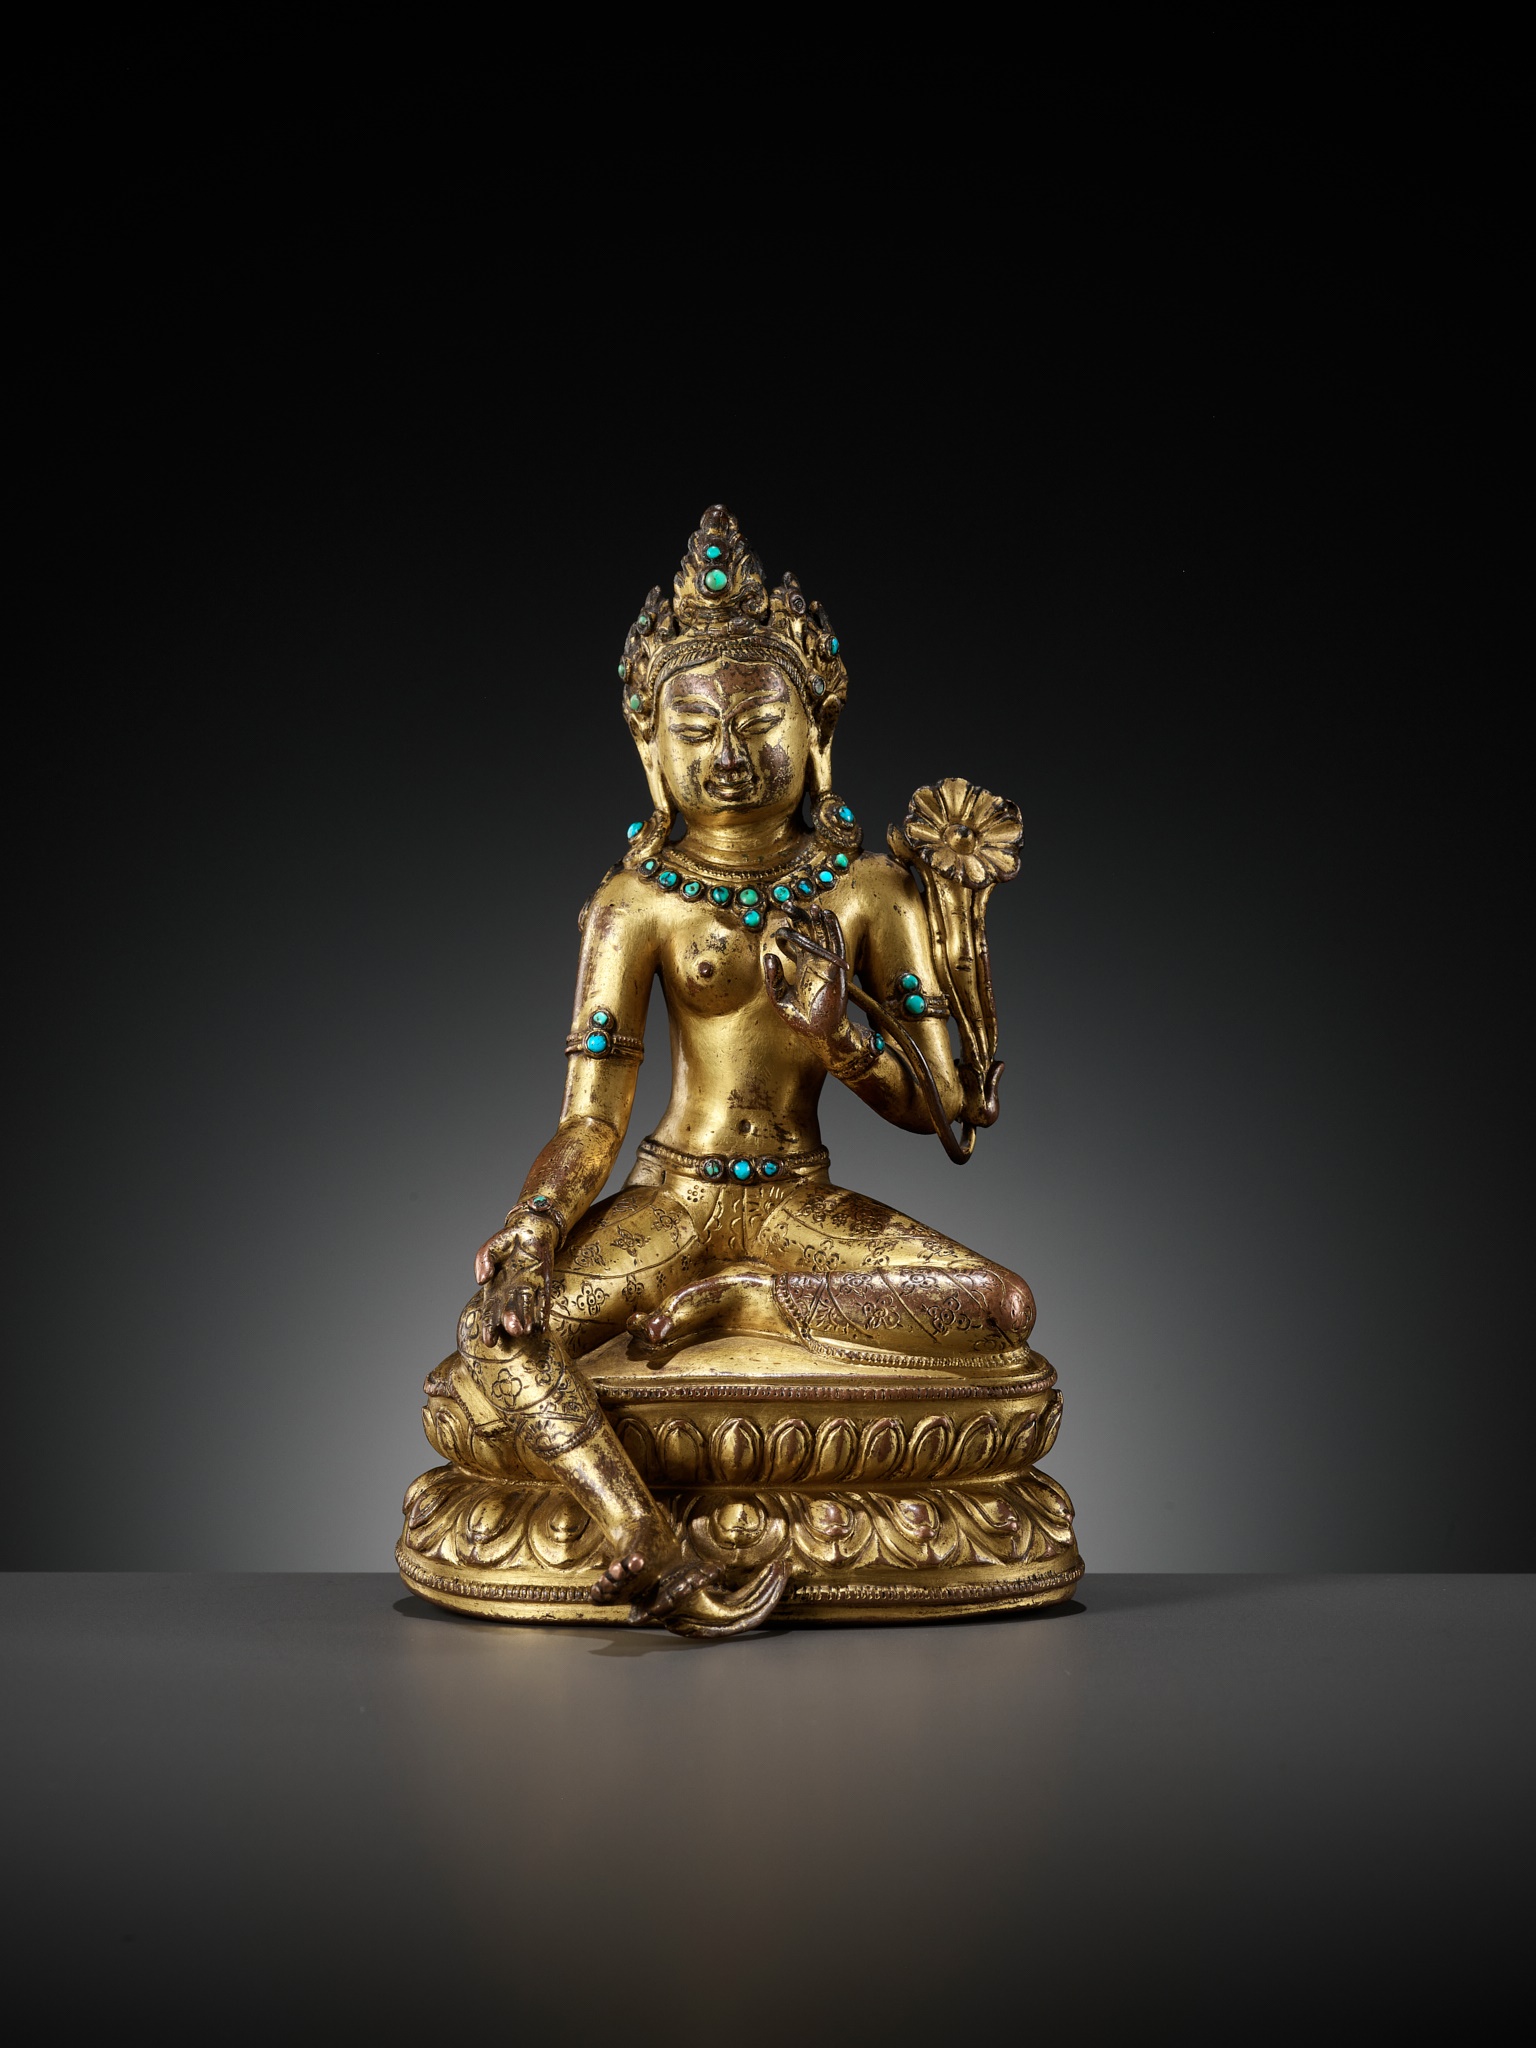 A GILT AND TURQUOISE-INLAID COPPER ALLOY FIGURE OF GREEN TARA, DENSATIL STYLE, TIBET, 14TH CENTURY - Image 6 of 16